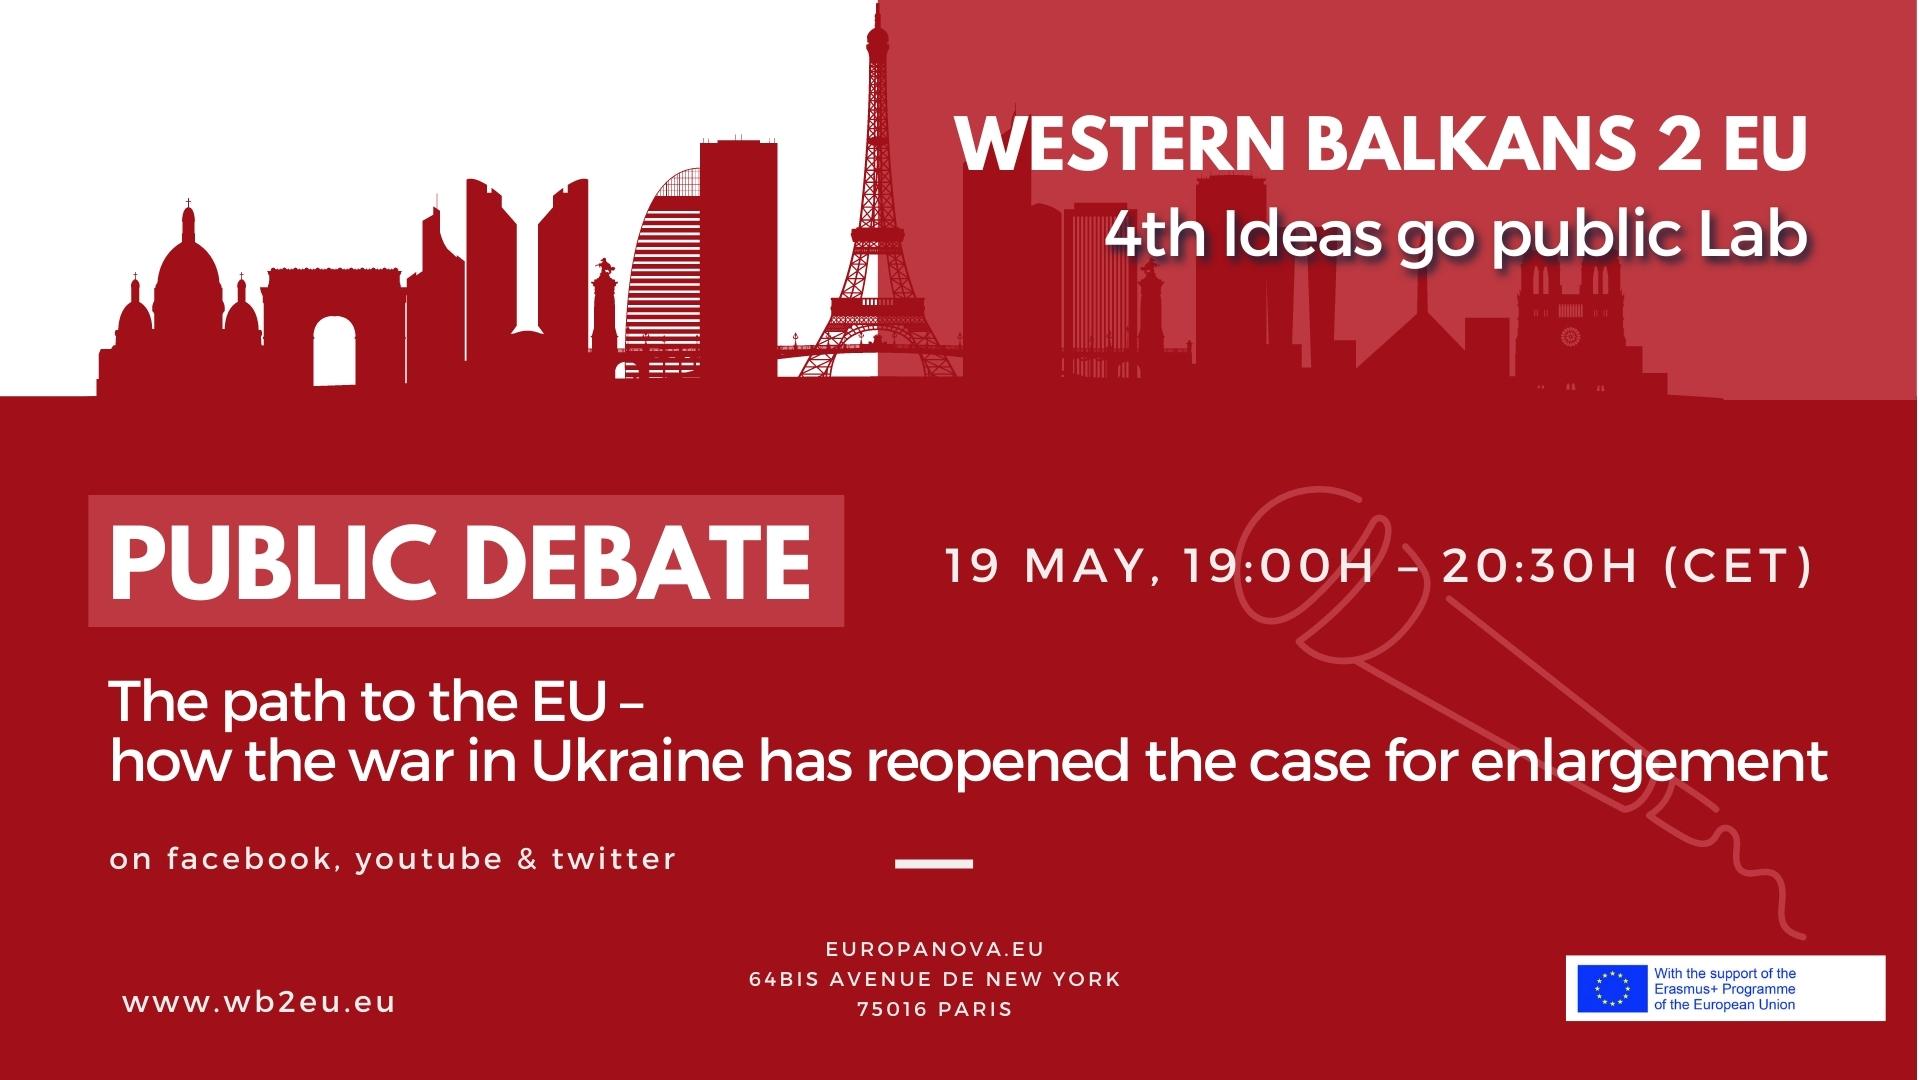 Western Balkans 2 EU #wb2eu: 4th Ideas go public Lab – Public Debate: The path to the EU – how the war in Ukraine has reopened the case for enlargement, 19 May 2022, Paris, 19:00-20:30h (CET)